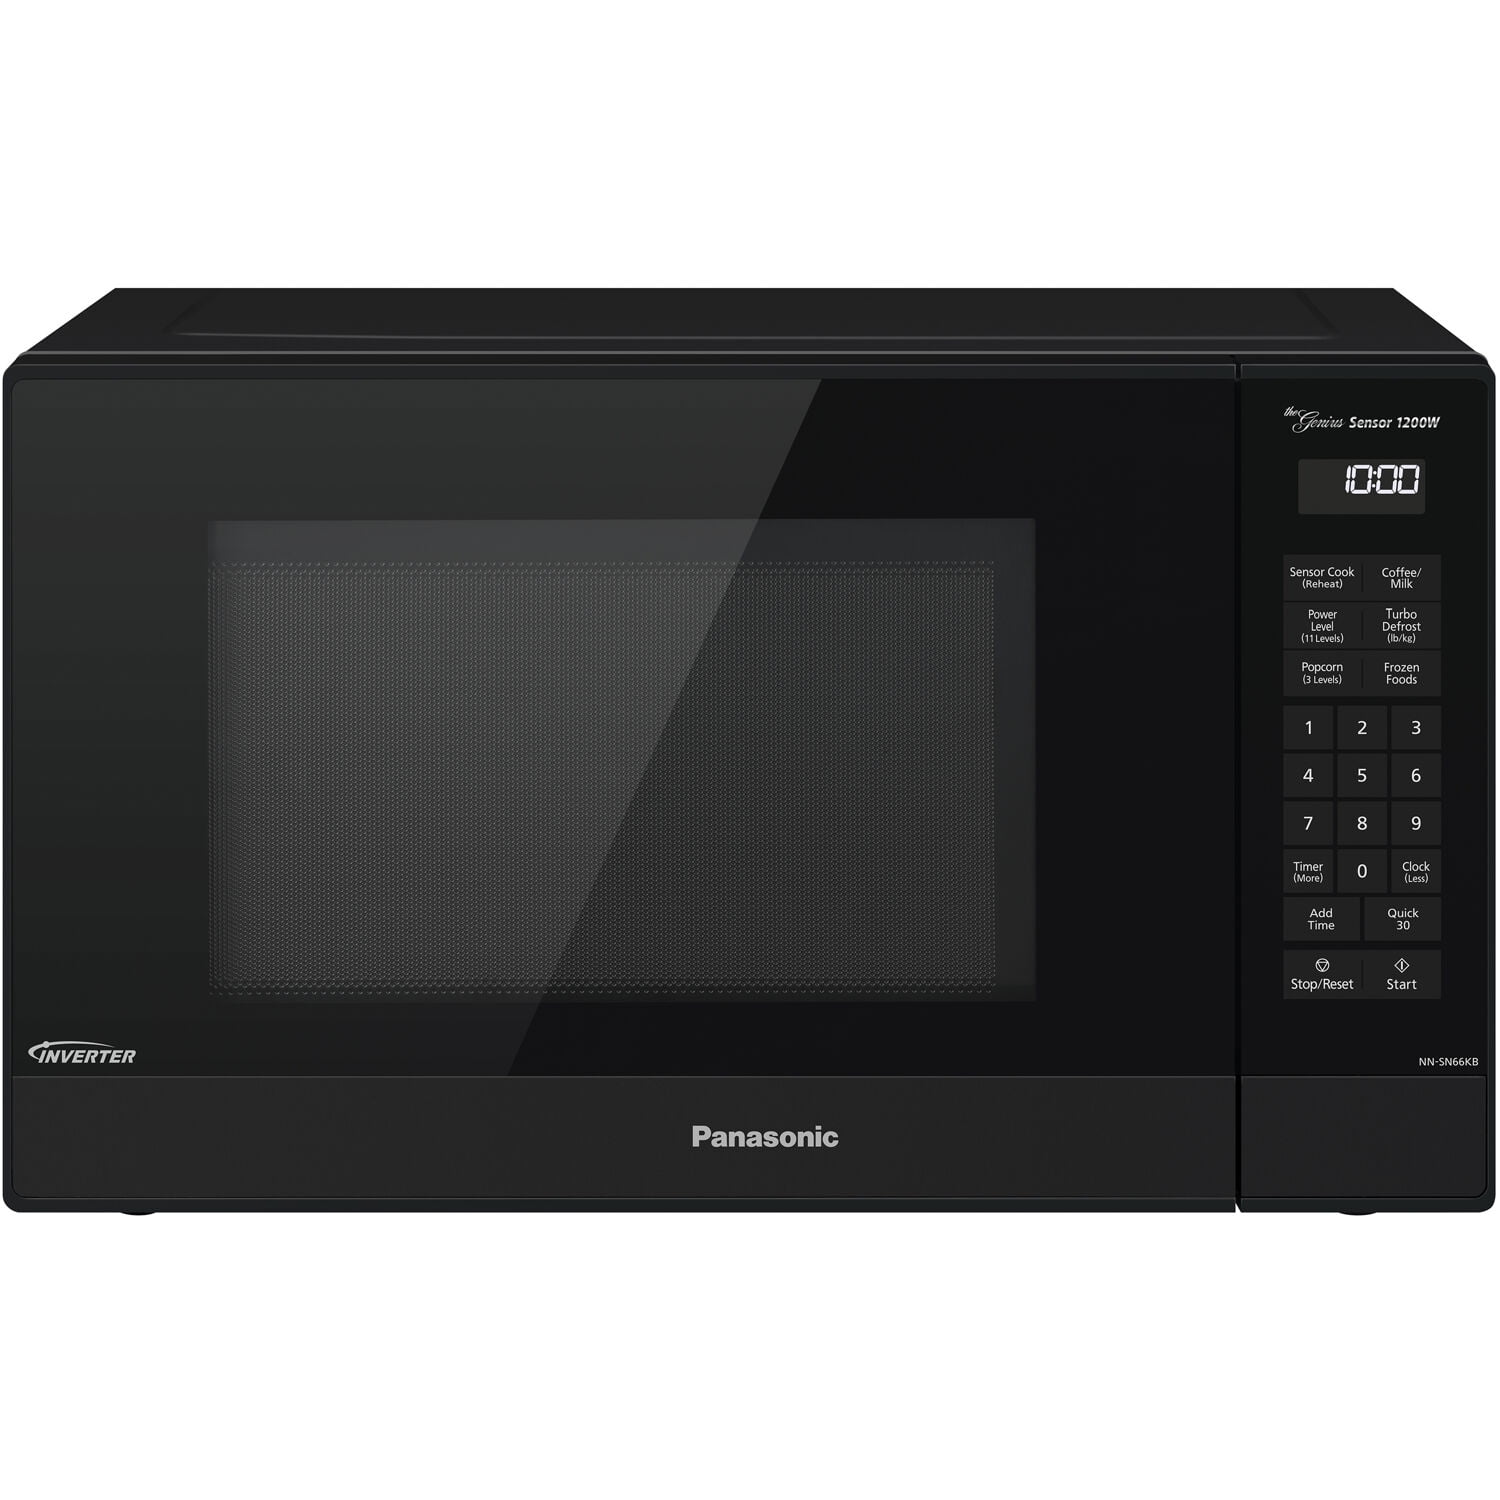 Picture of Panasonic NN-SN66KB 1.2 cu. ft. Microwave Oven with Cyclonic Wave Inventer, Black